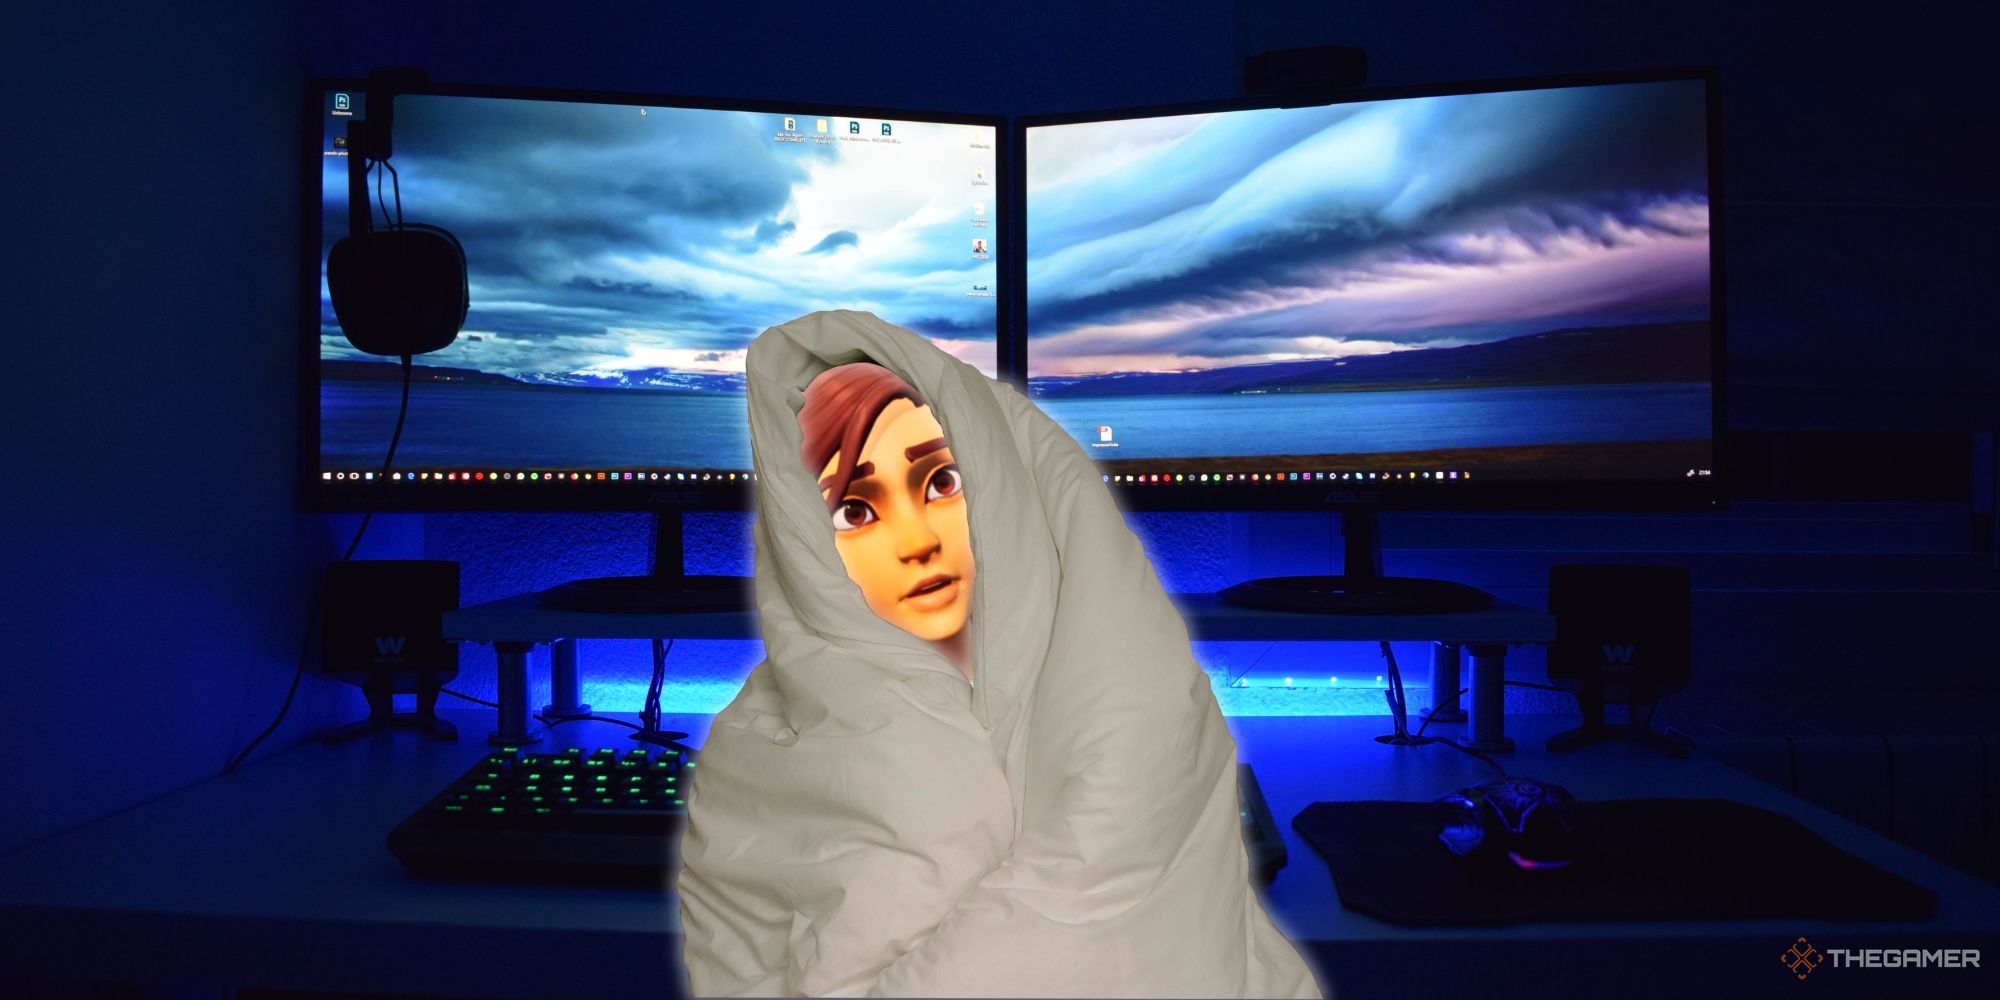 An animated woman with brownish hair wrapped in a white blanket, with two computer monitors in the background.